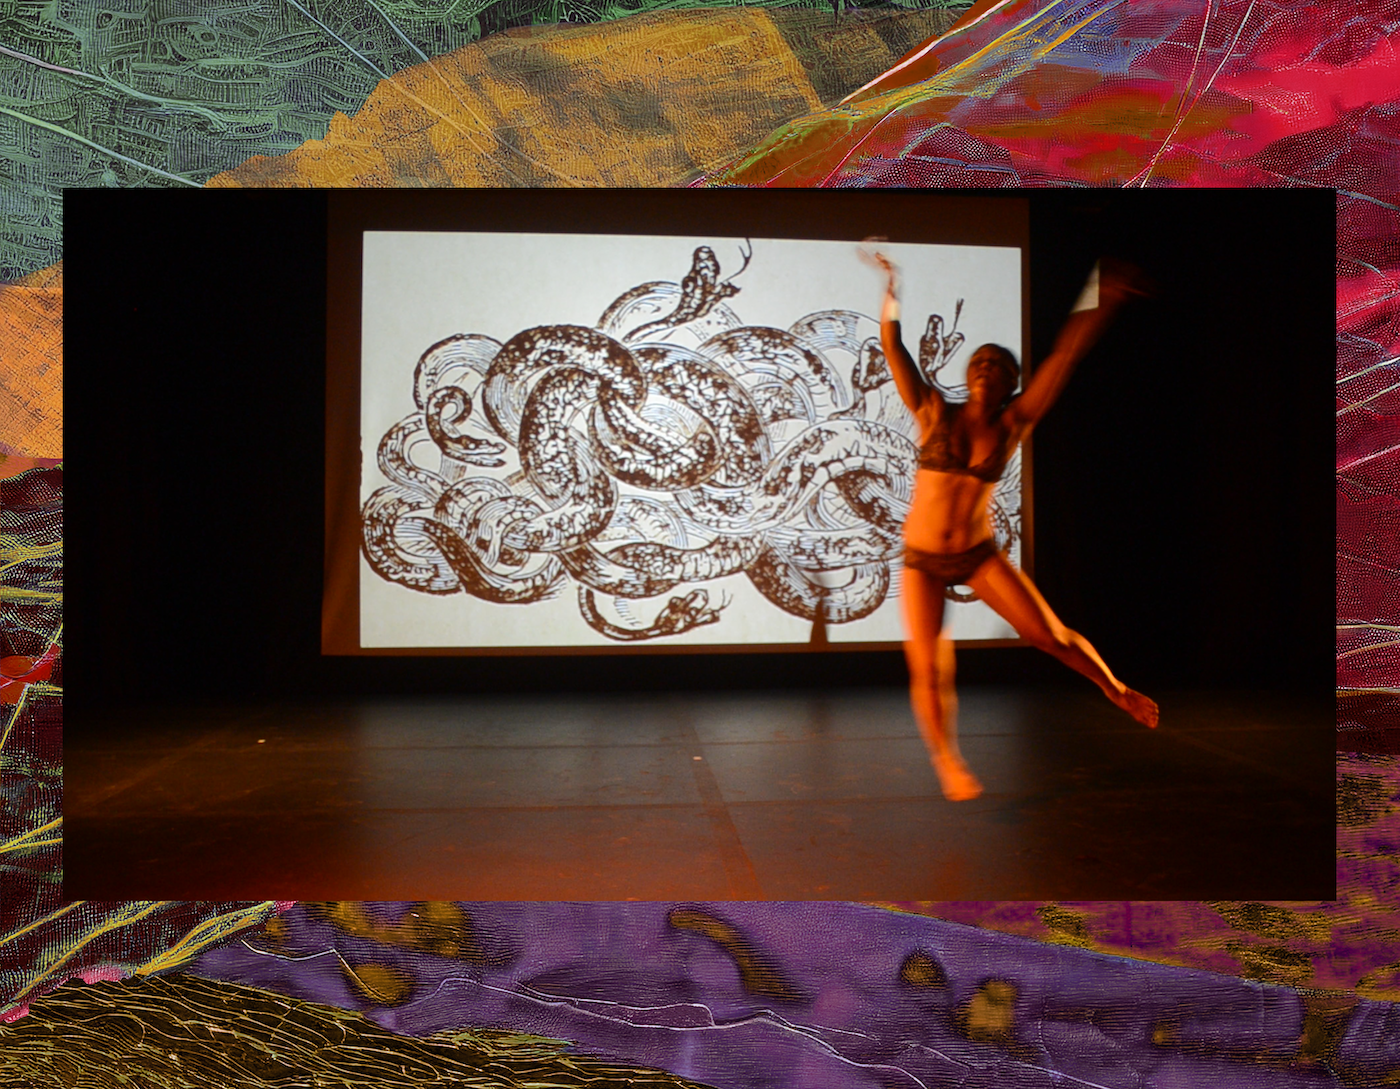 Alttext in German: A dancer in front of a projection of snake drawings. Alt text in English: A dancer in front of a projection of snake drawings.